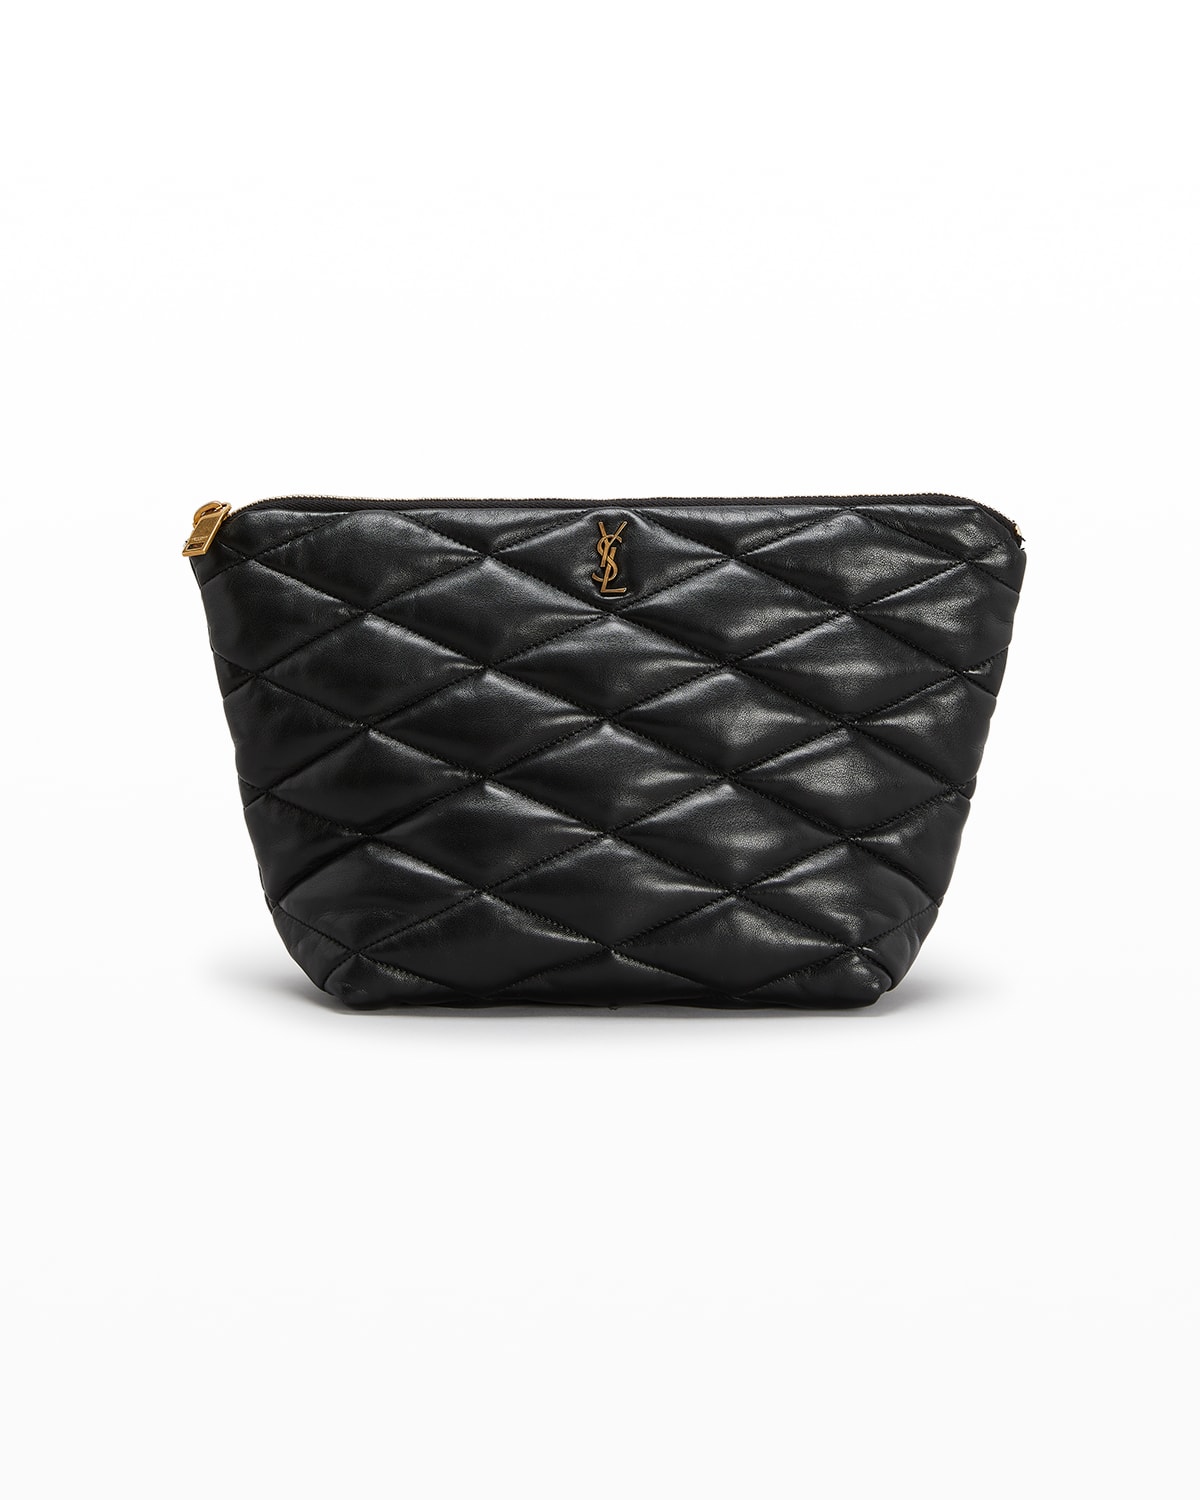 Sade Ysl Quilted Lambskin Pouch Clutch Bag In Nero